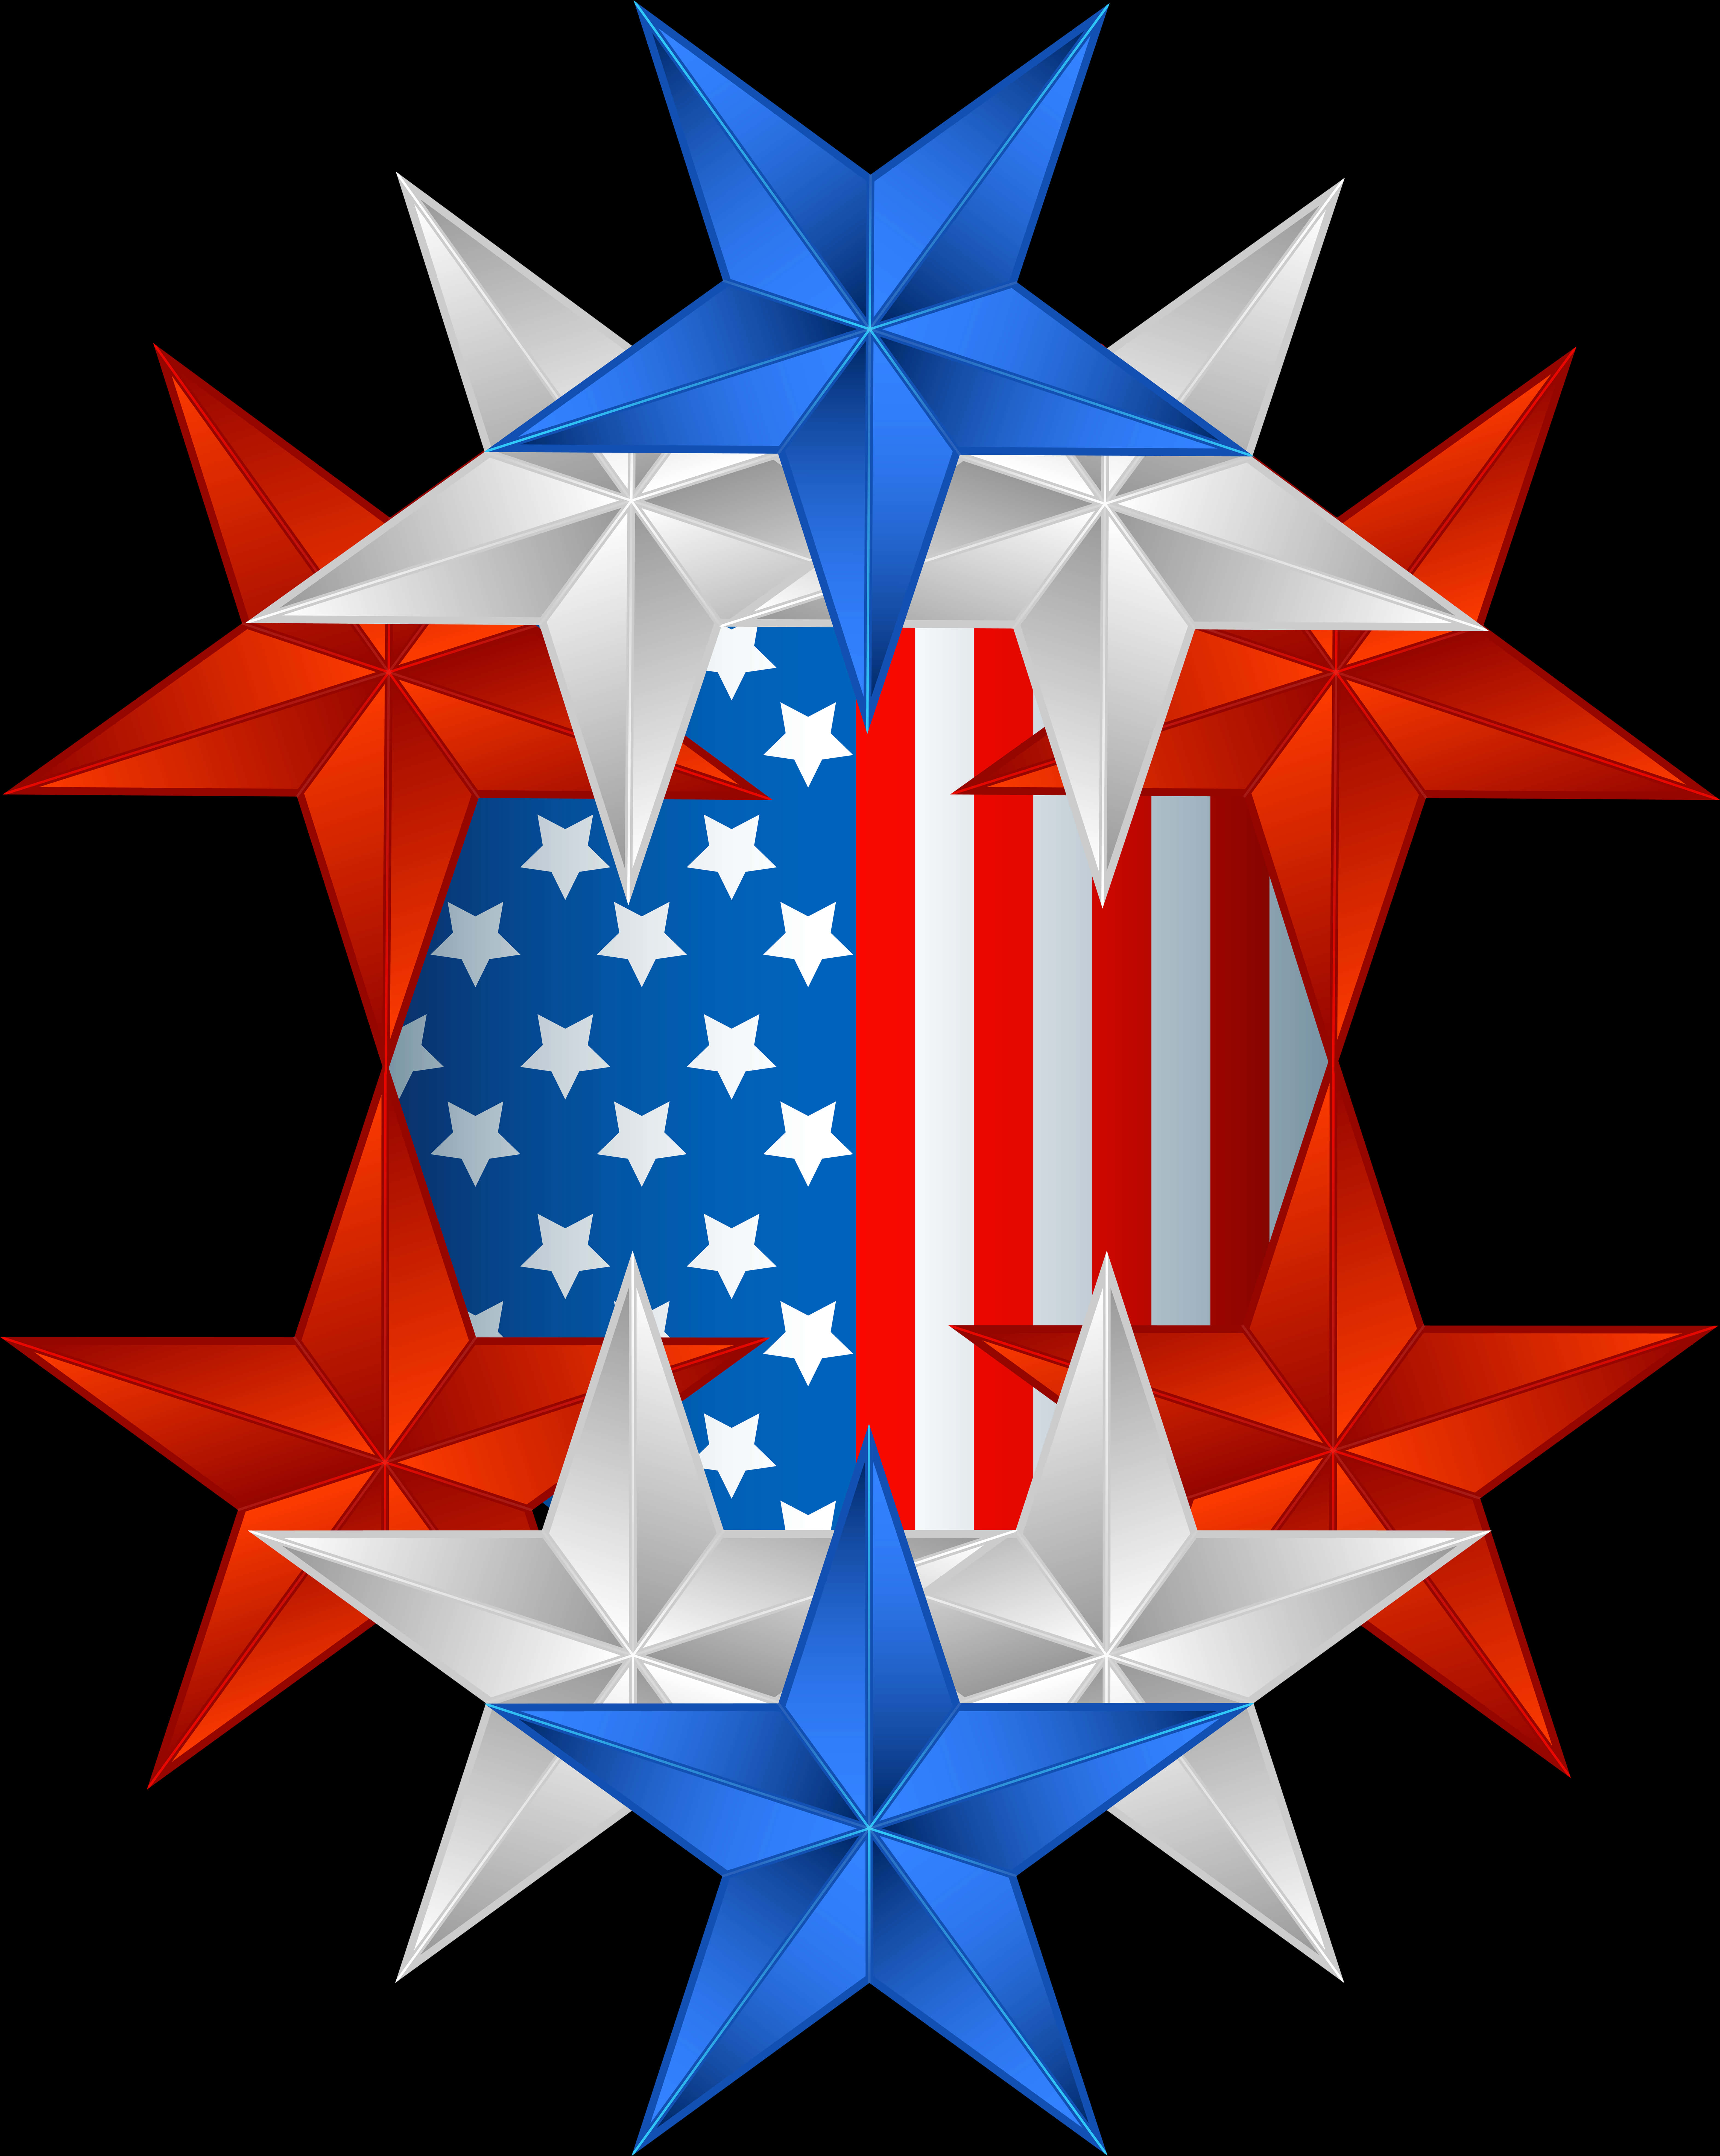 A Group Of Stars In Red White And Blue